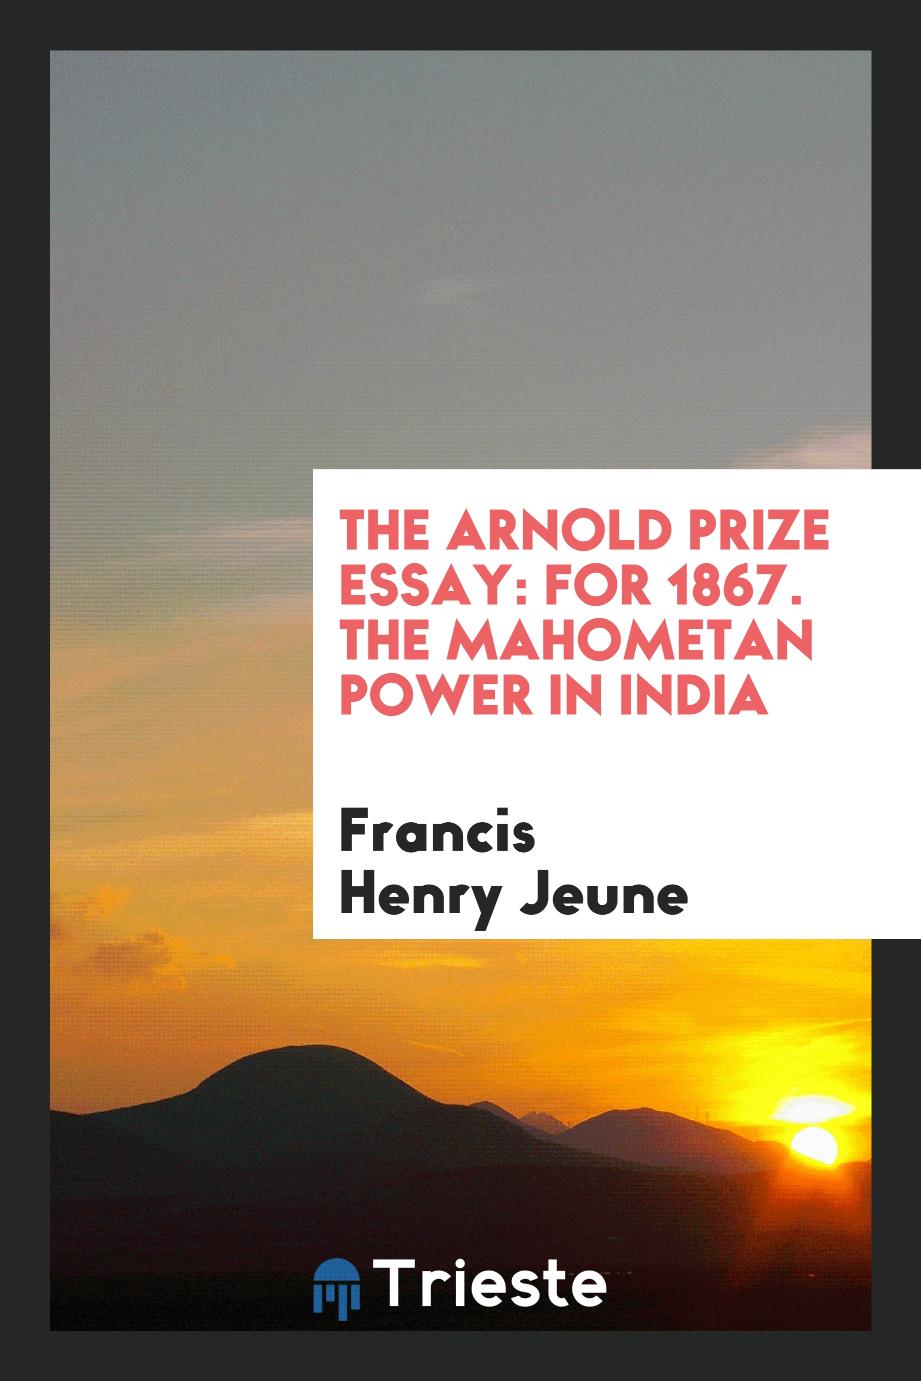 The Arnold Prize essay: for 1867. The Mahometan Power in India